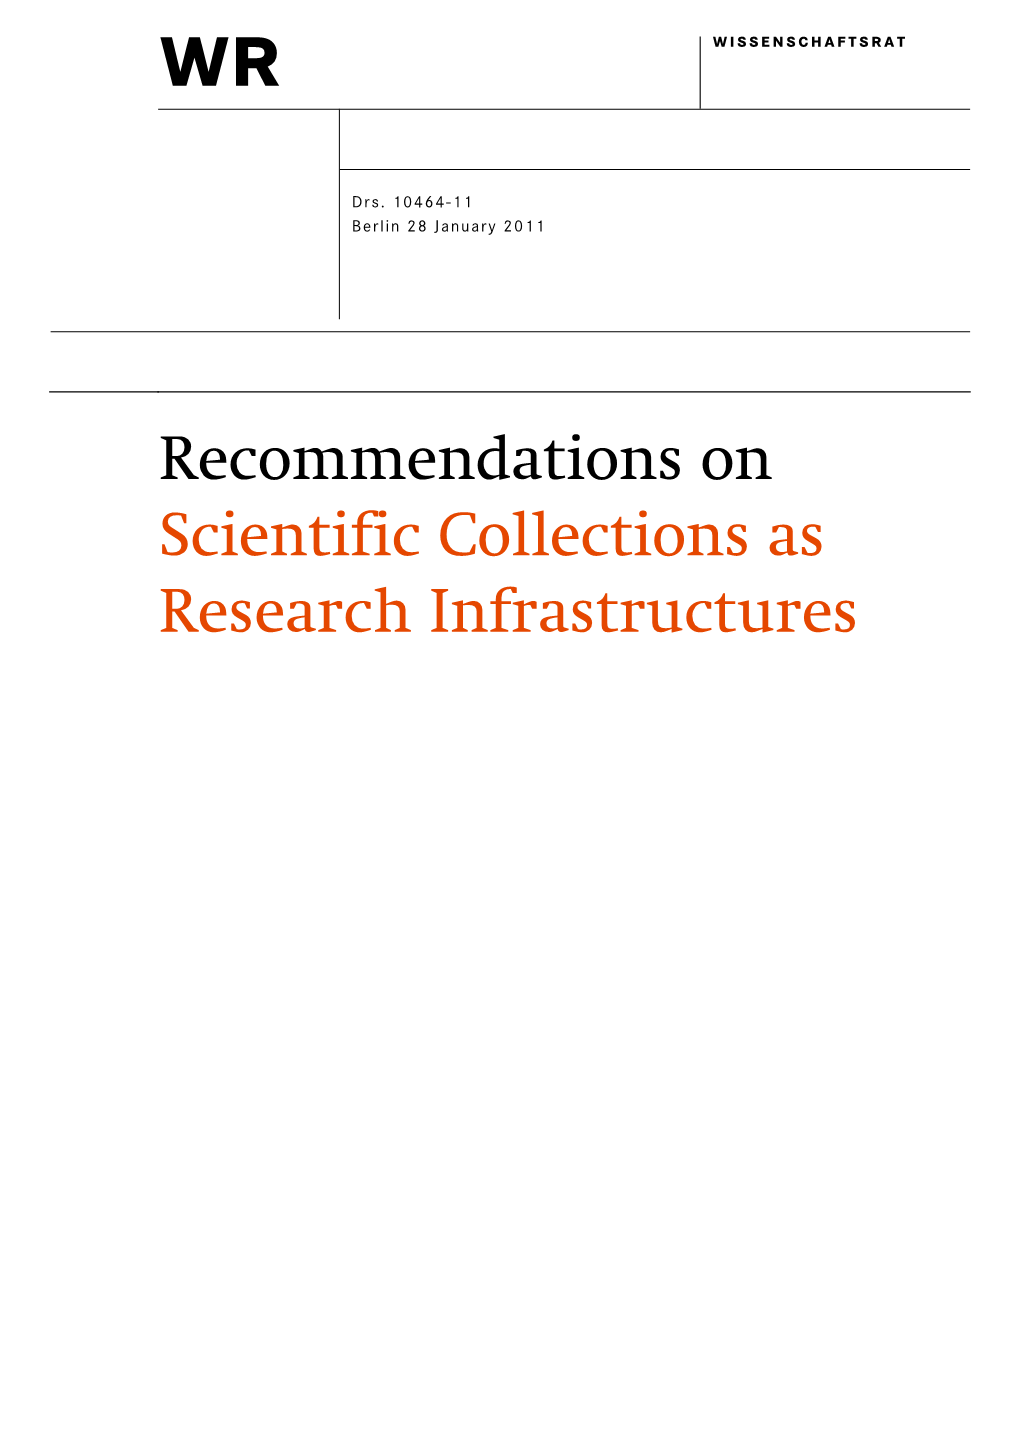 Recommendations on Scientific Collections As Research Infrastructures